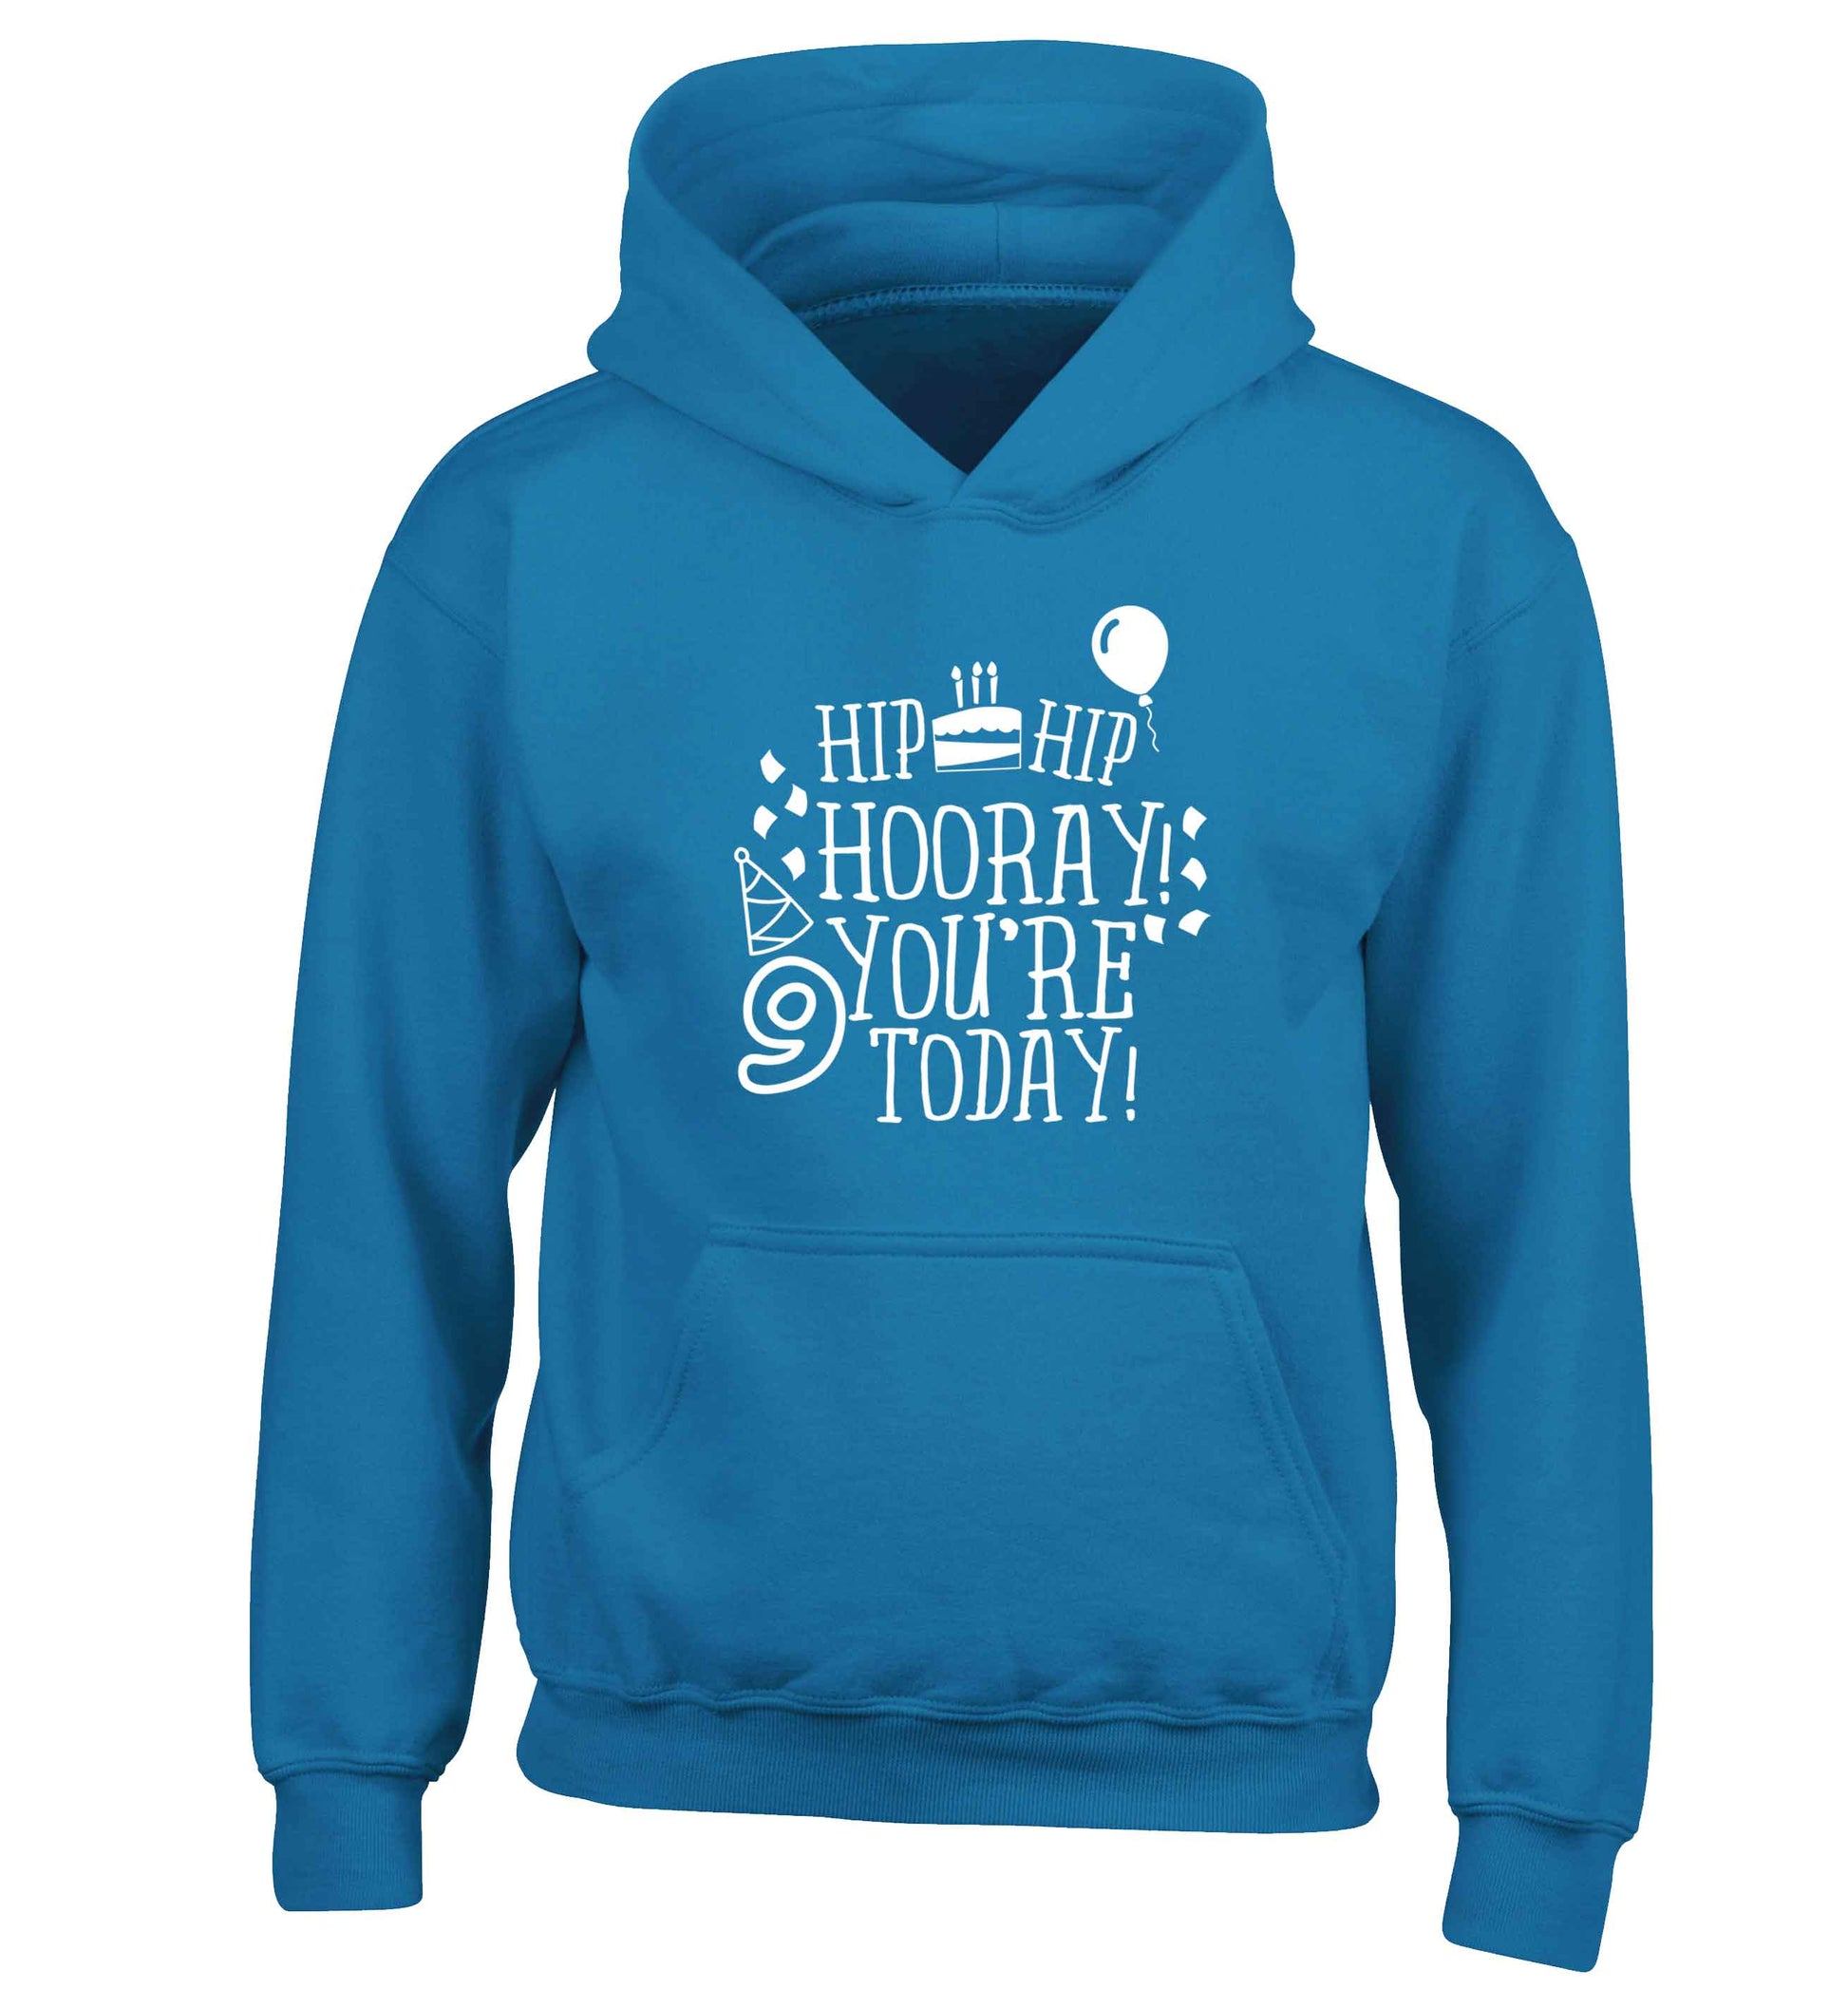 Hip hip hooray you're 9 today! children's blue hoodie 12-13 Years